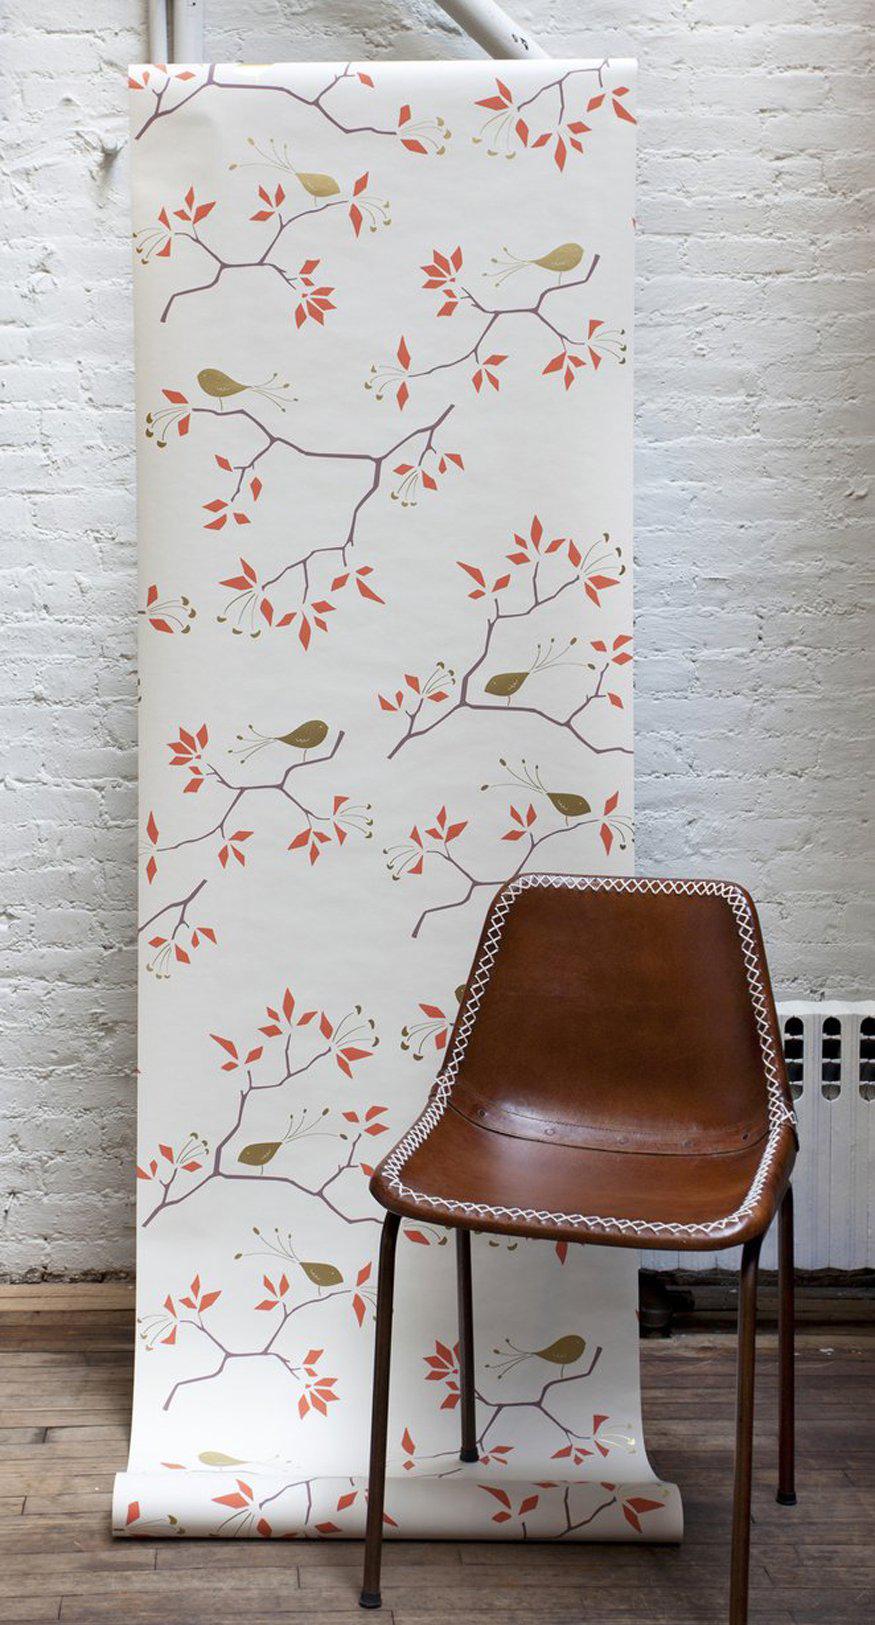 The Geo Bird pattern is one of our most popular because it brings nature into your home in a modern slightly geometric interpretation. The tree leaves, branches and birds have been simplified to graphic shapes making this pattern work in Hollywood